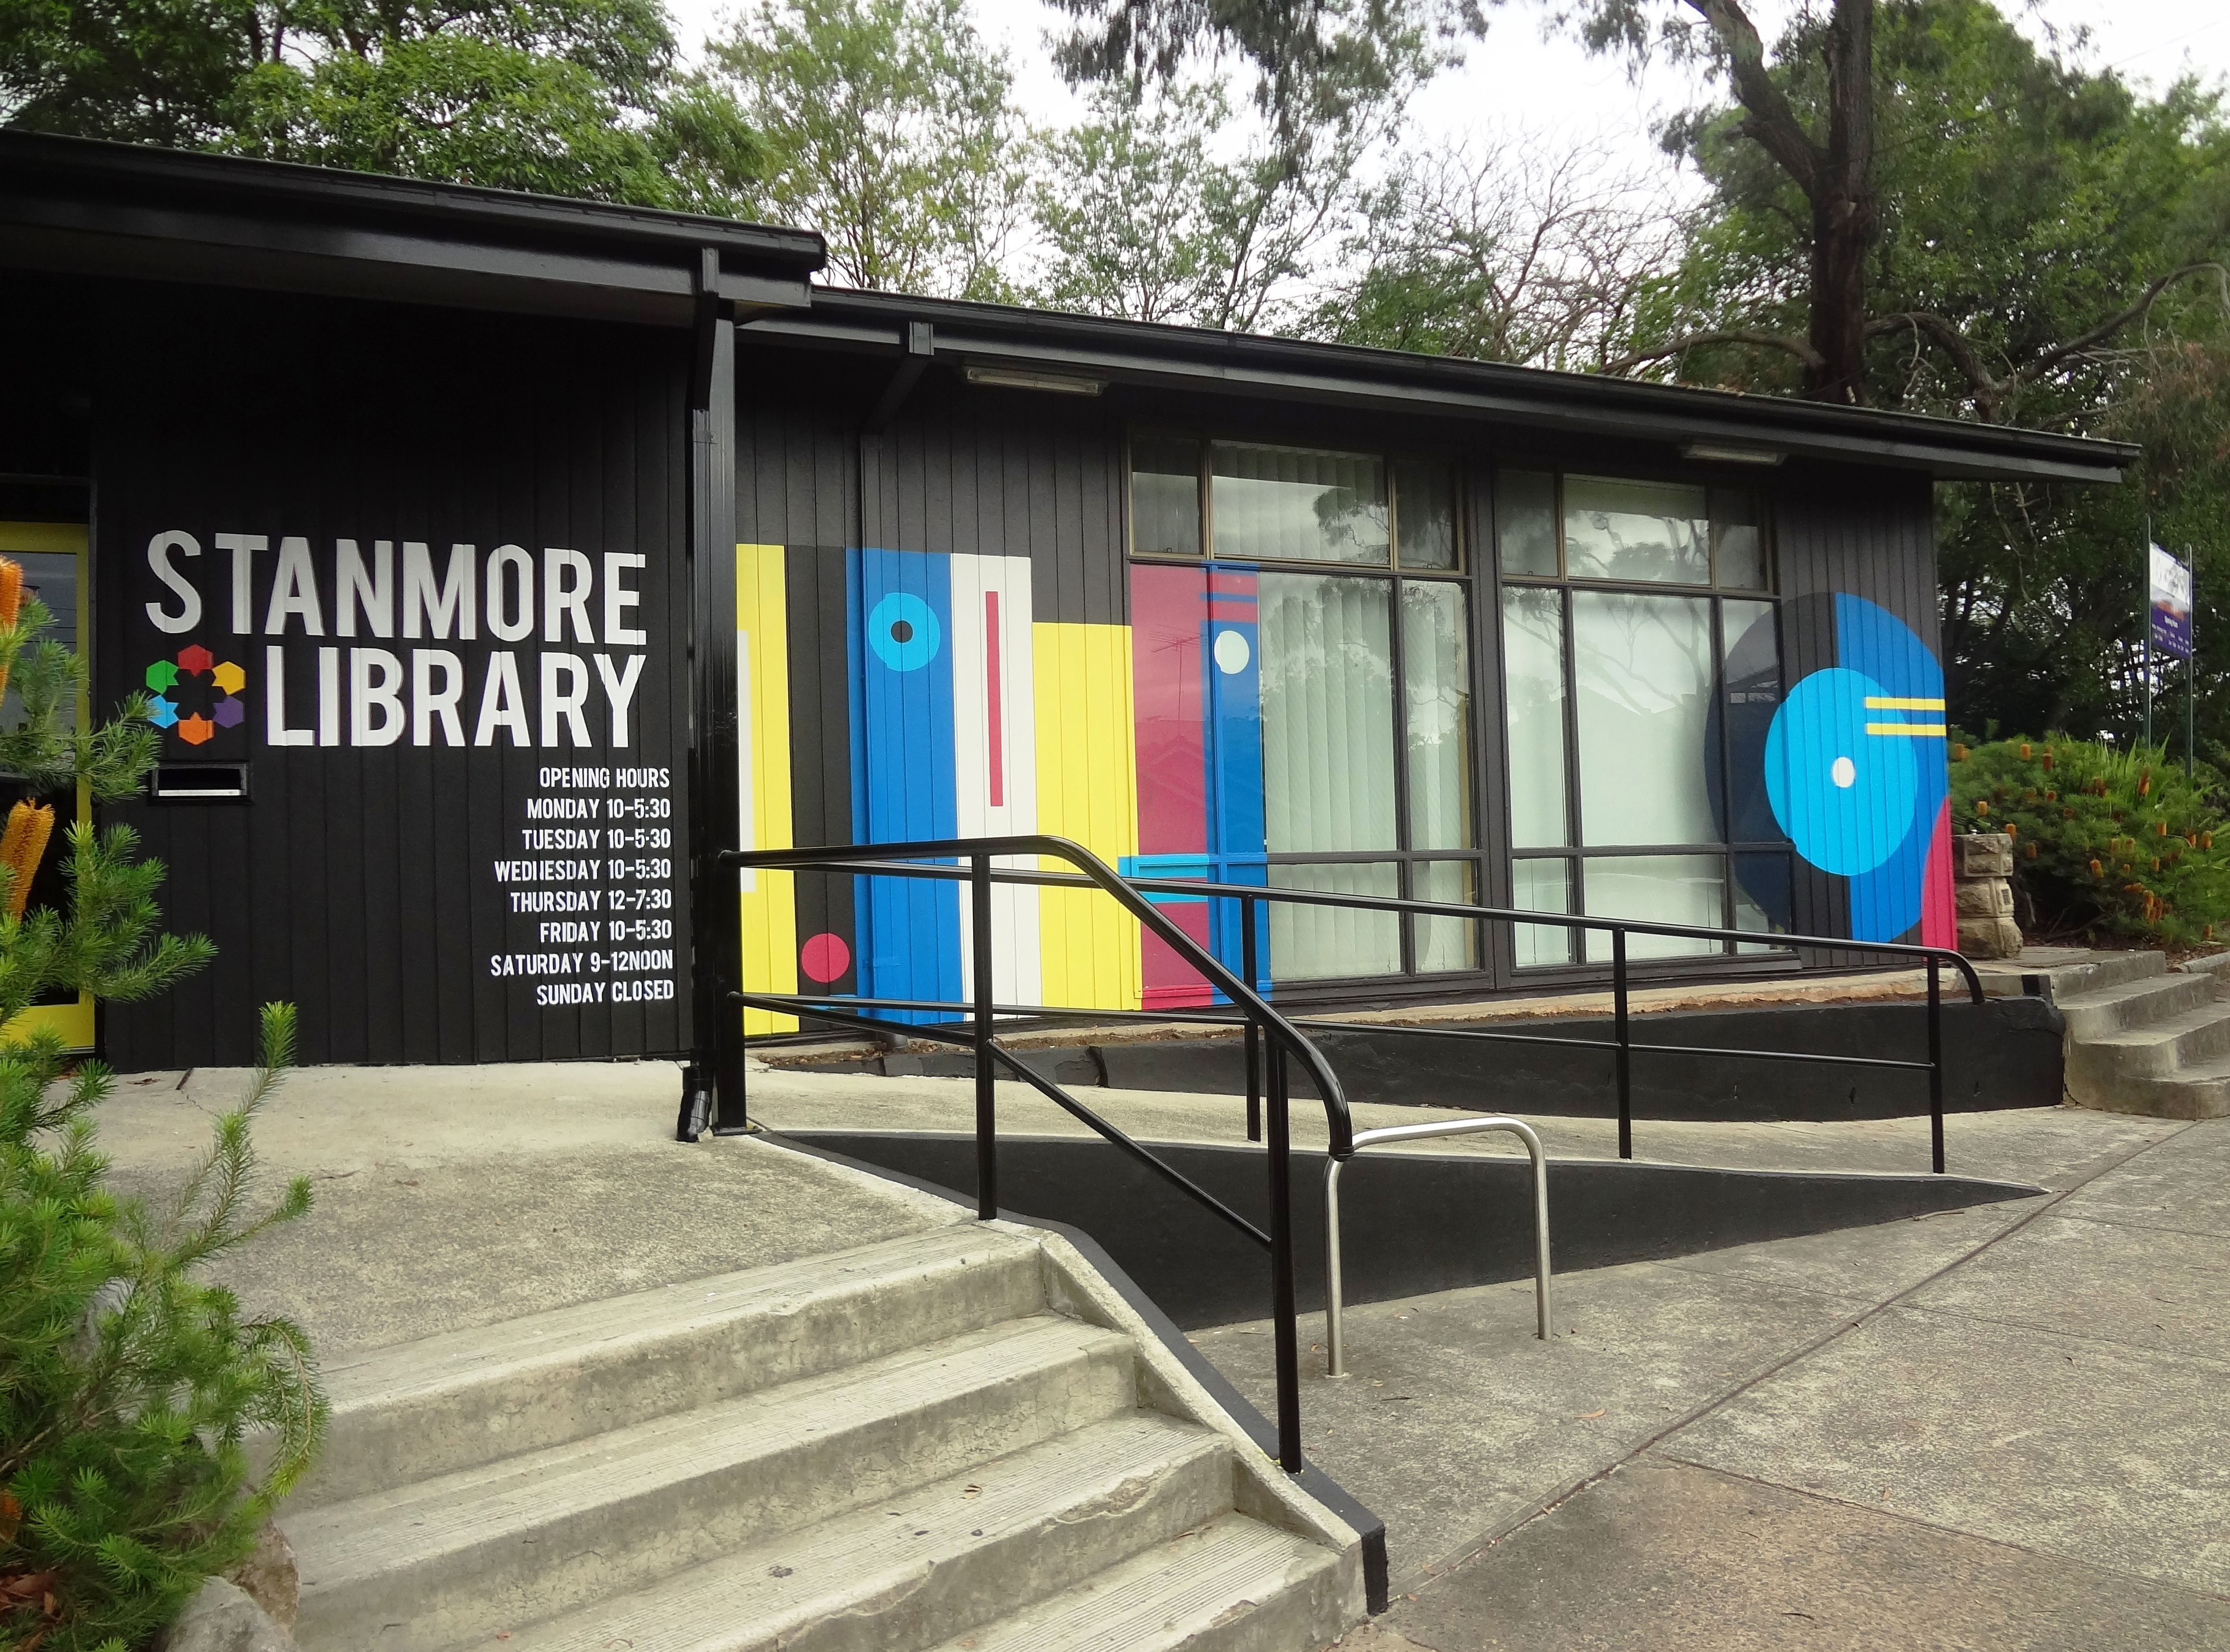 Stanmore Library pic